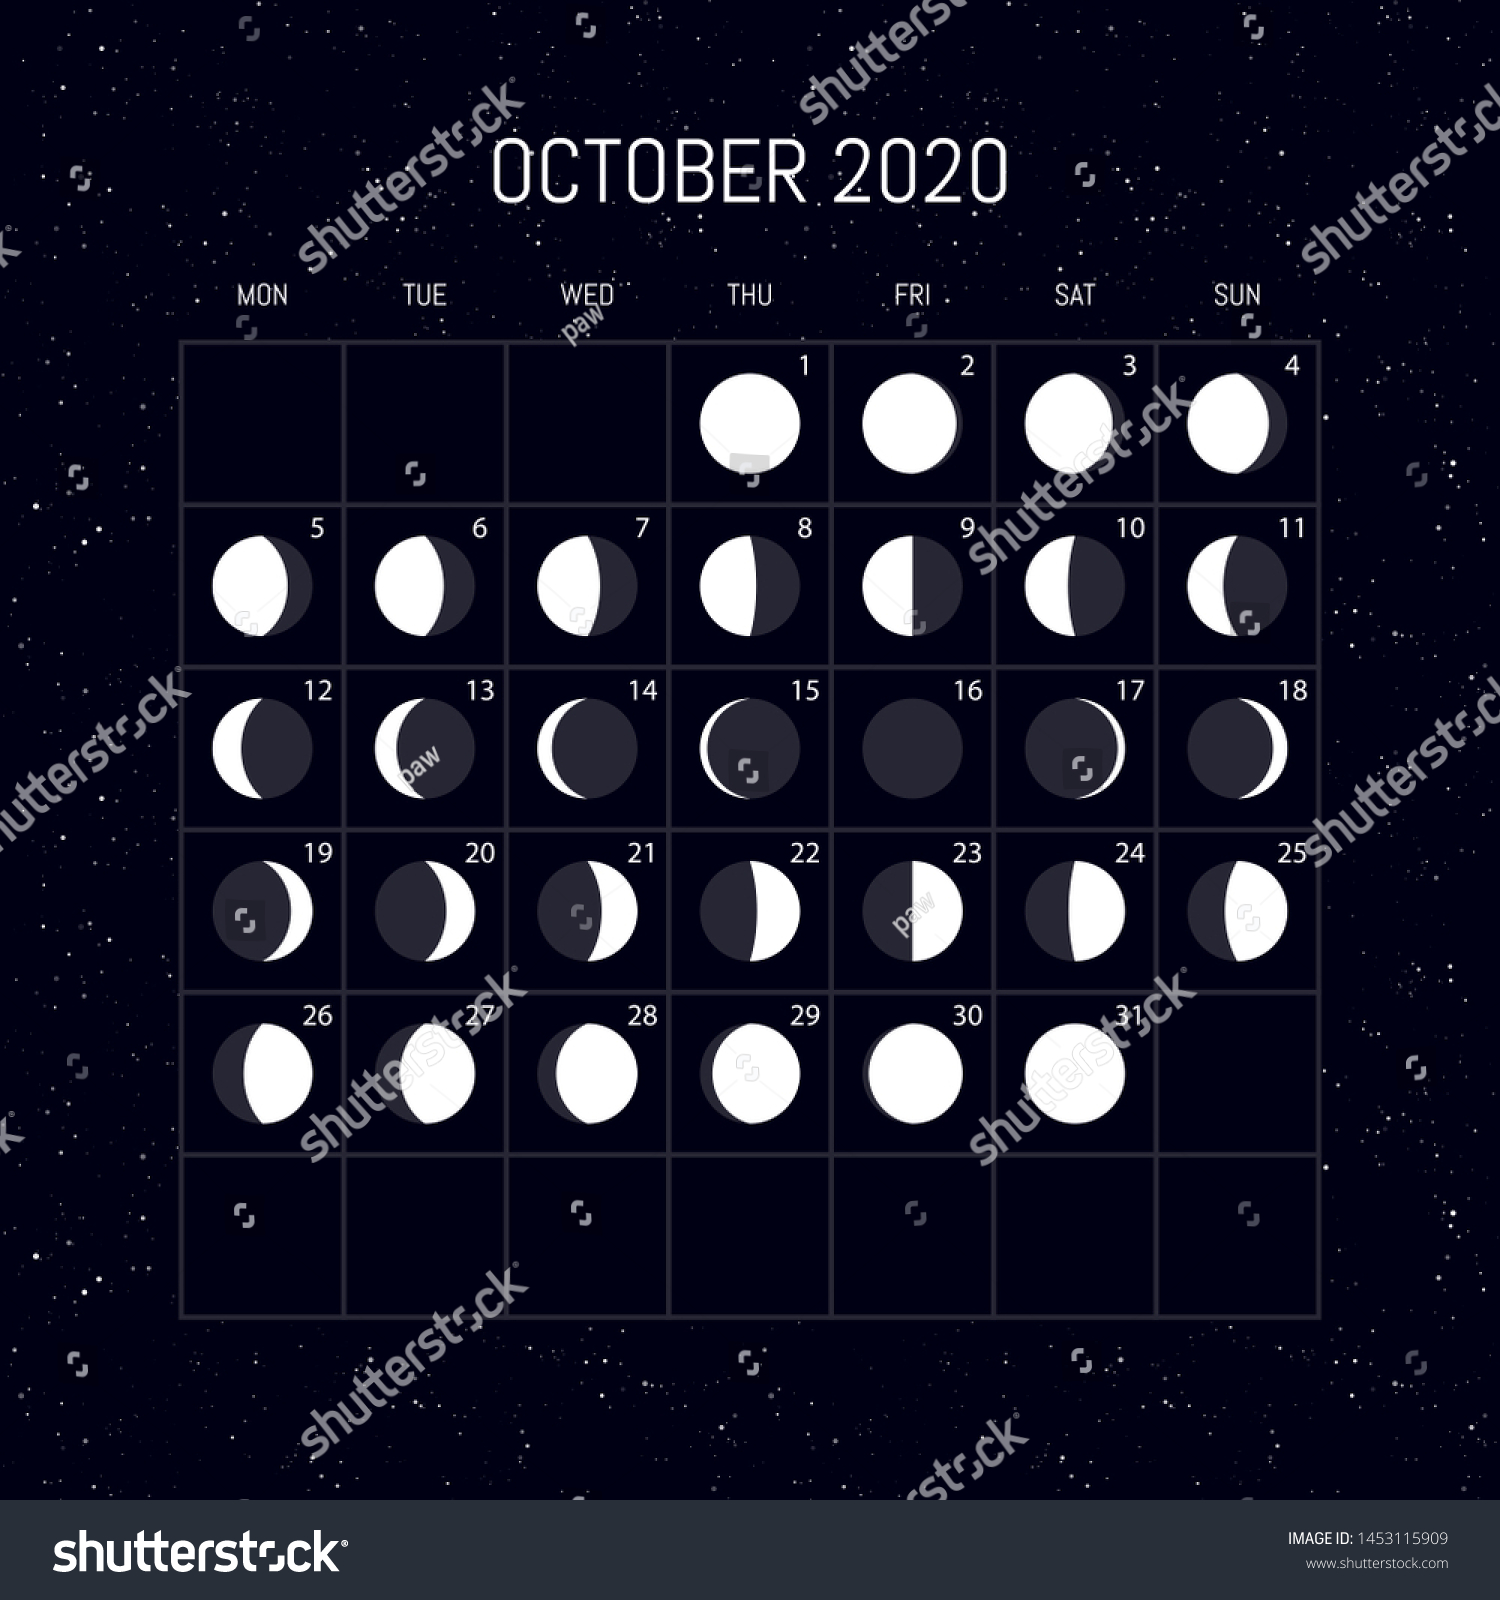 Moon Phases Calendar 2020 Year October Stock Vector Royalty Free 1453115909